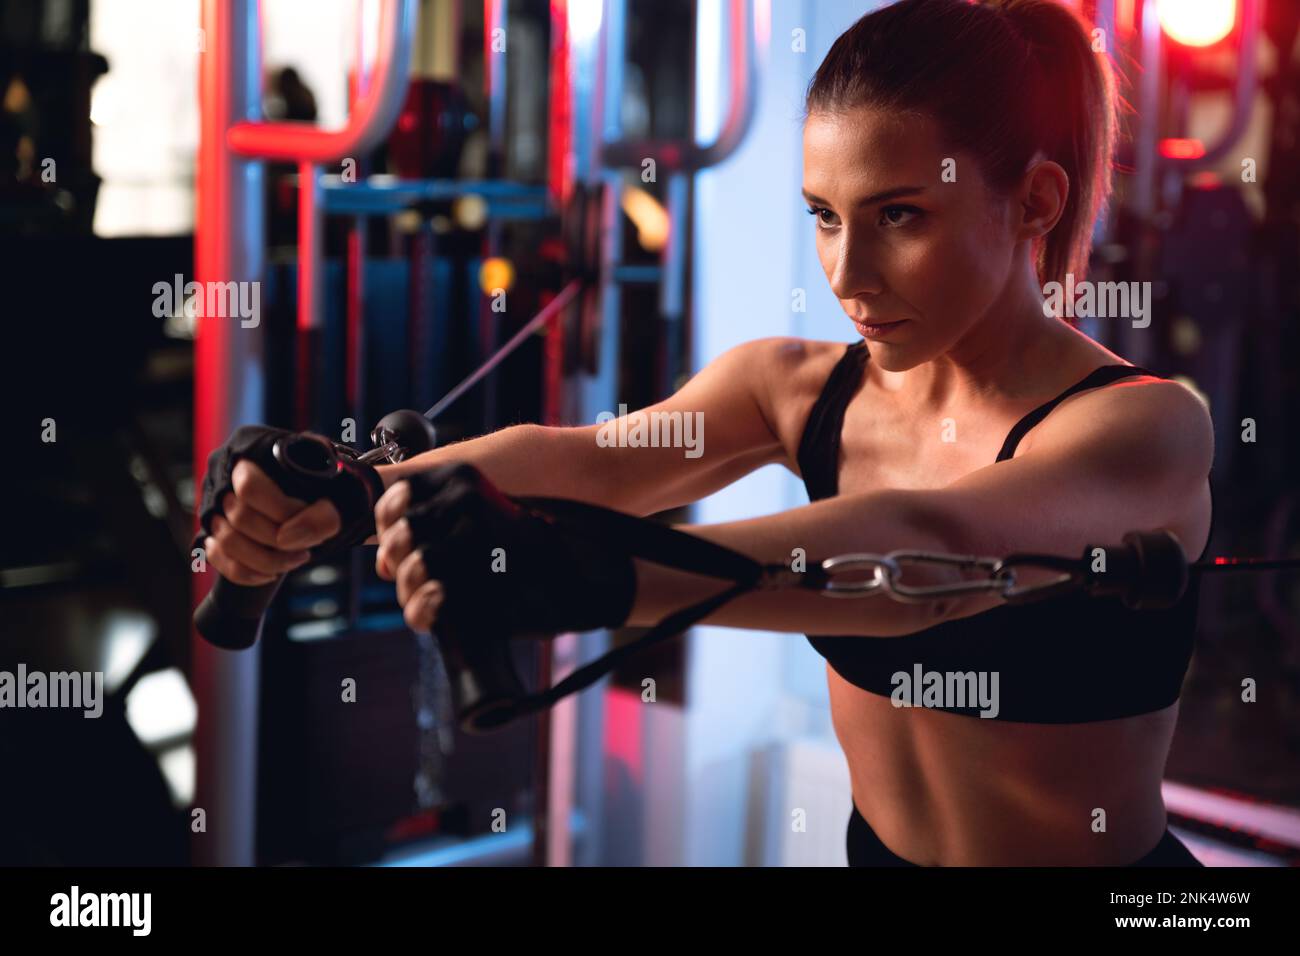 https://c8.alamy.com/comp/2NK4W6W/portrait-of-a-30s-woman-working-out-chests-on-a-cable-machine-2NK4W6W.jpg